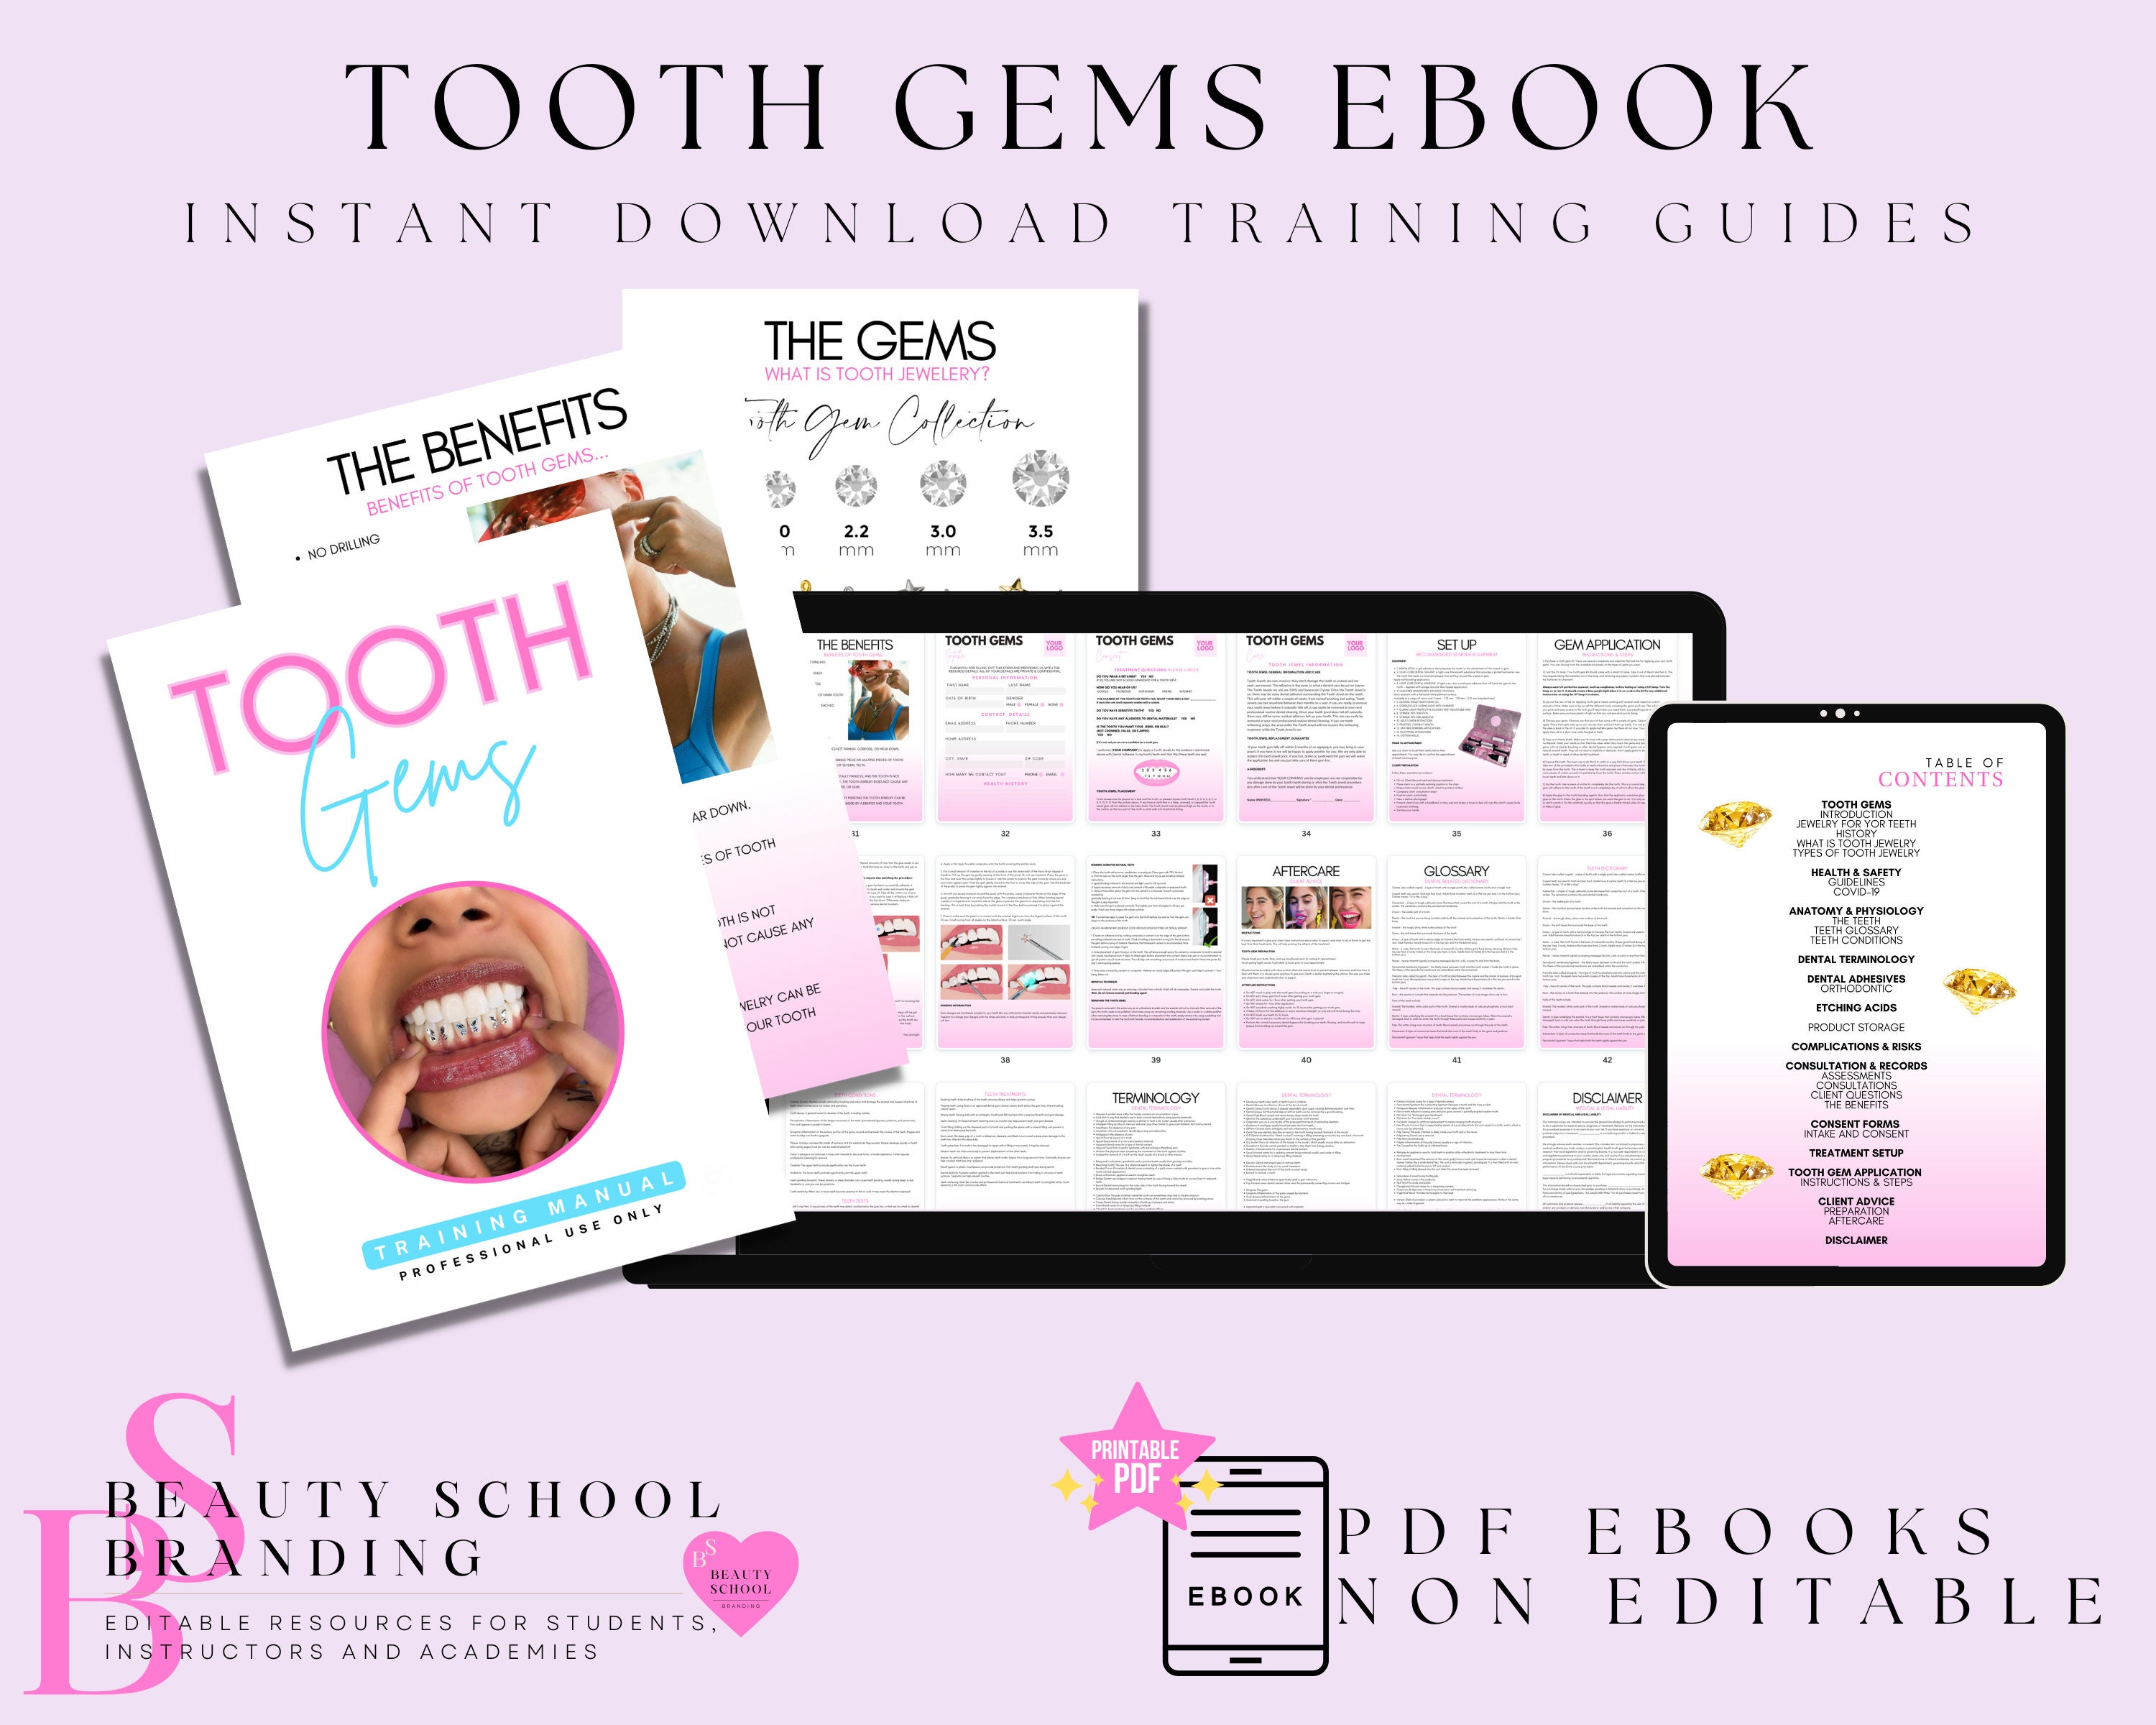 Student Tooth Gems Class Handout Notes, Revision Theory Add Ons,  Information Sheet, Tooth Gems Protocols Reference Sheet, Editable in Canva  -  Sweden